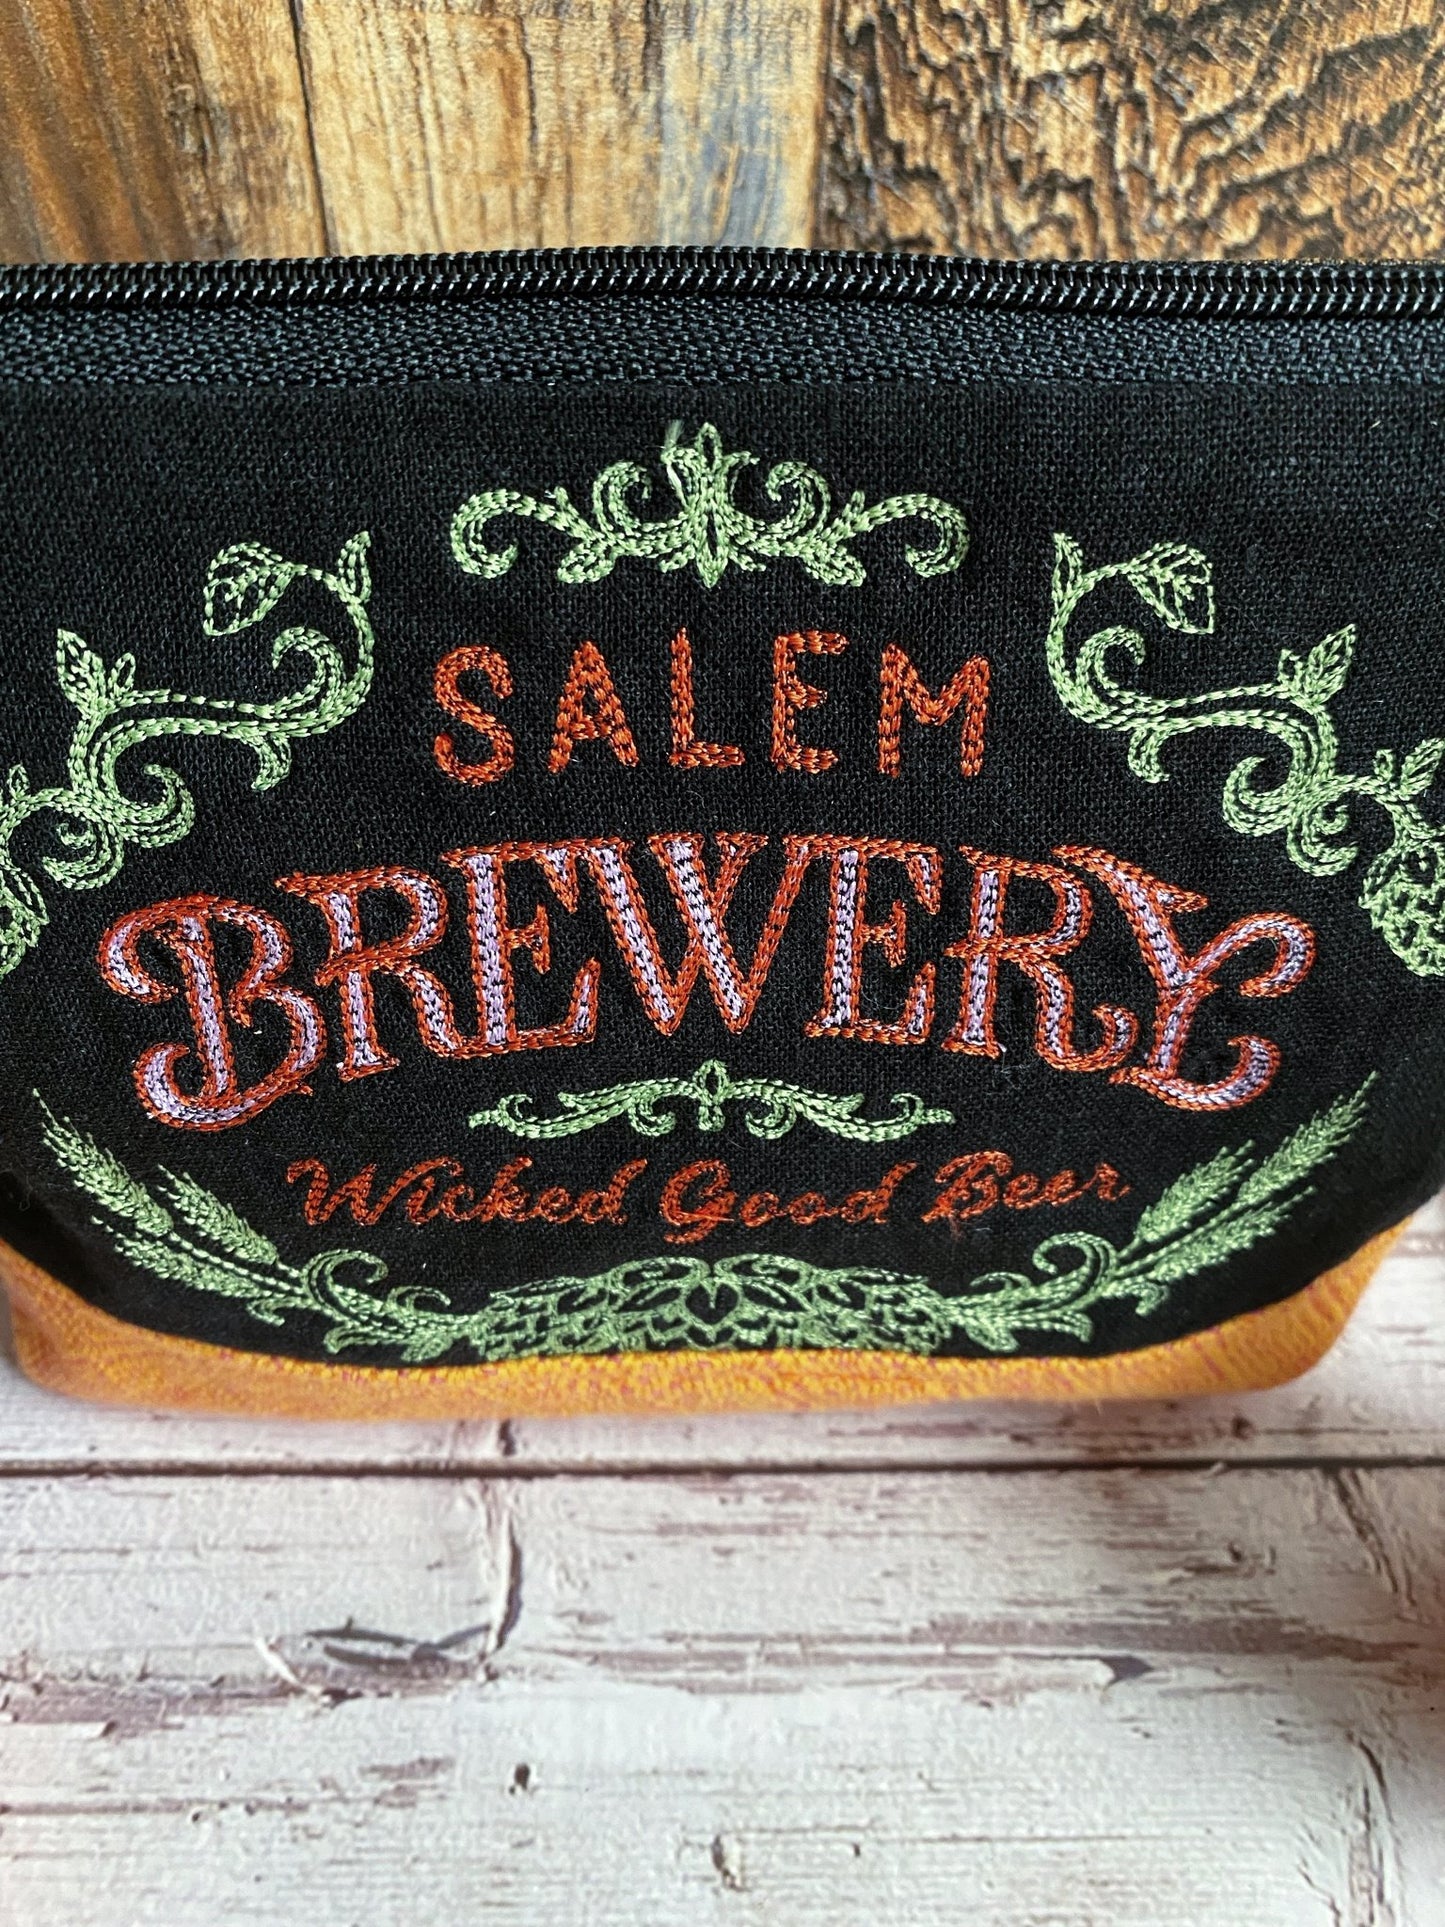 Wicked Good Beer Grab-and-Go Zipper Bag